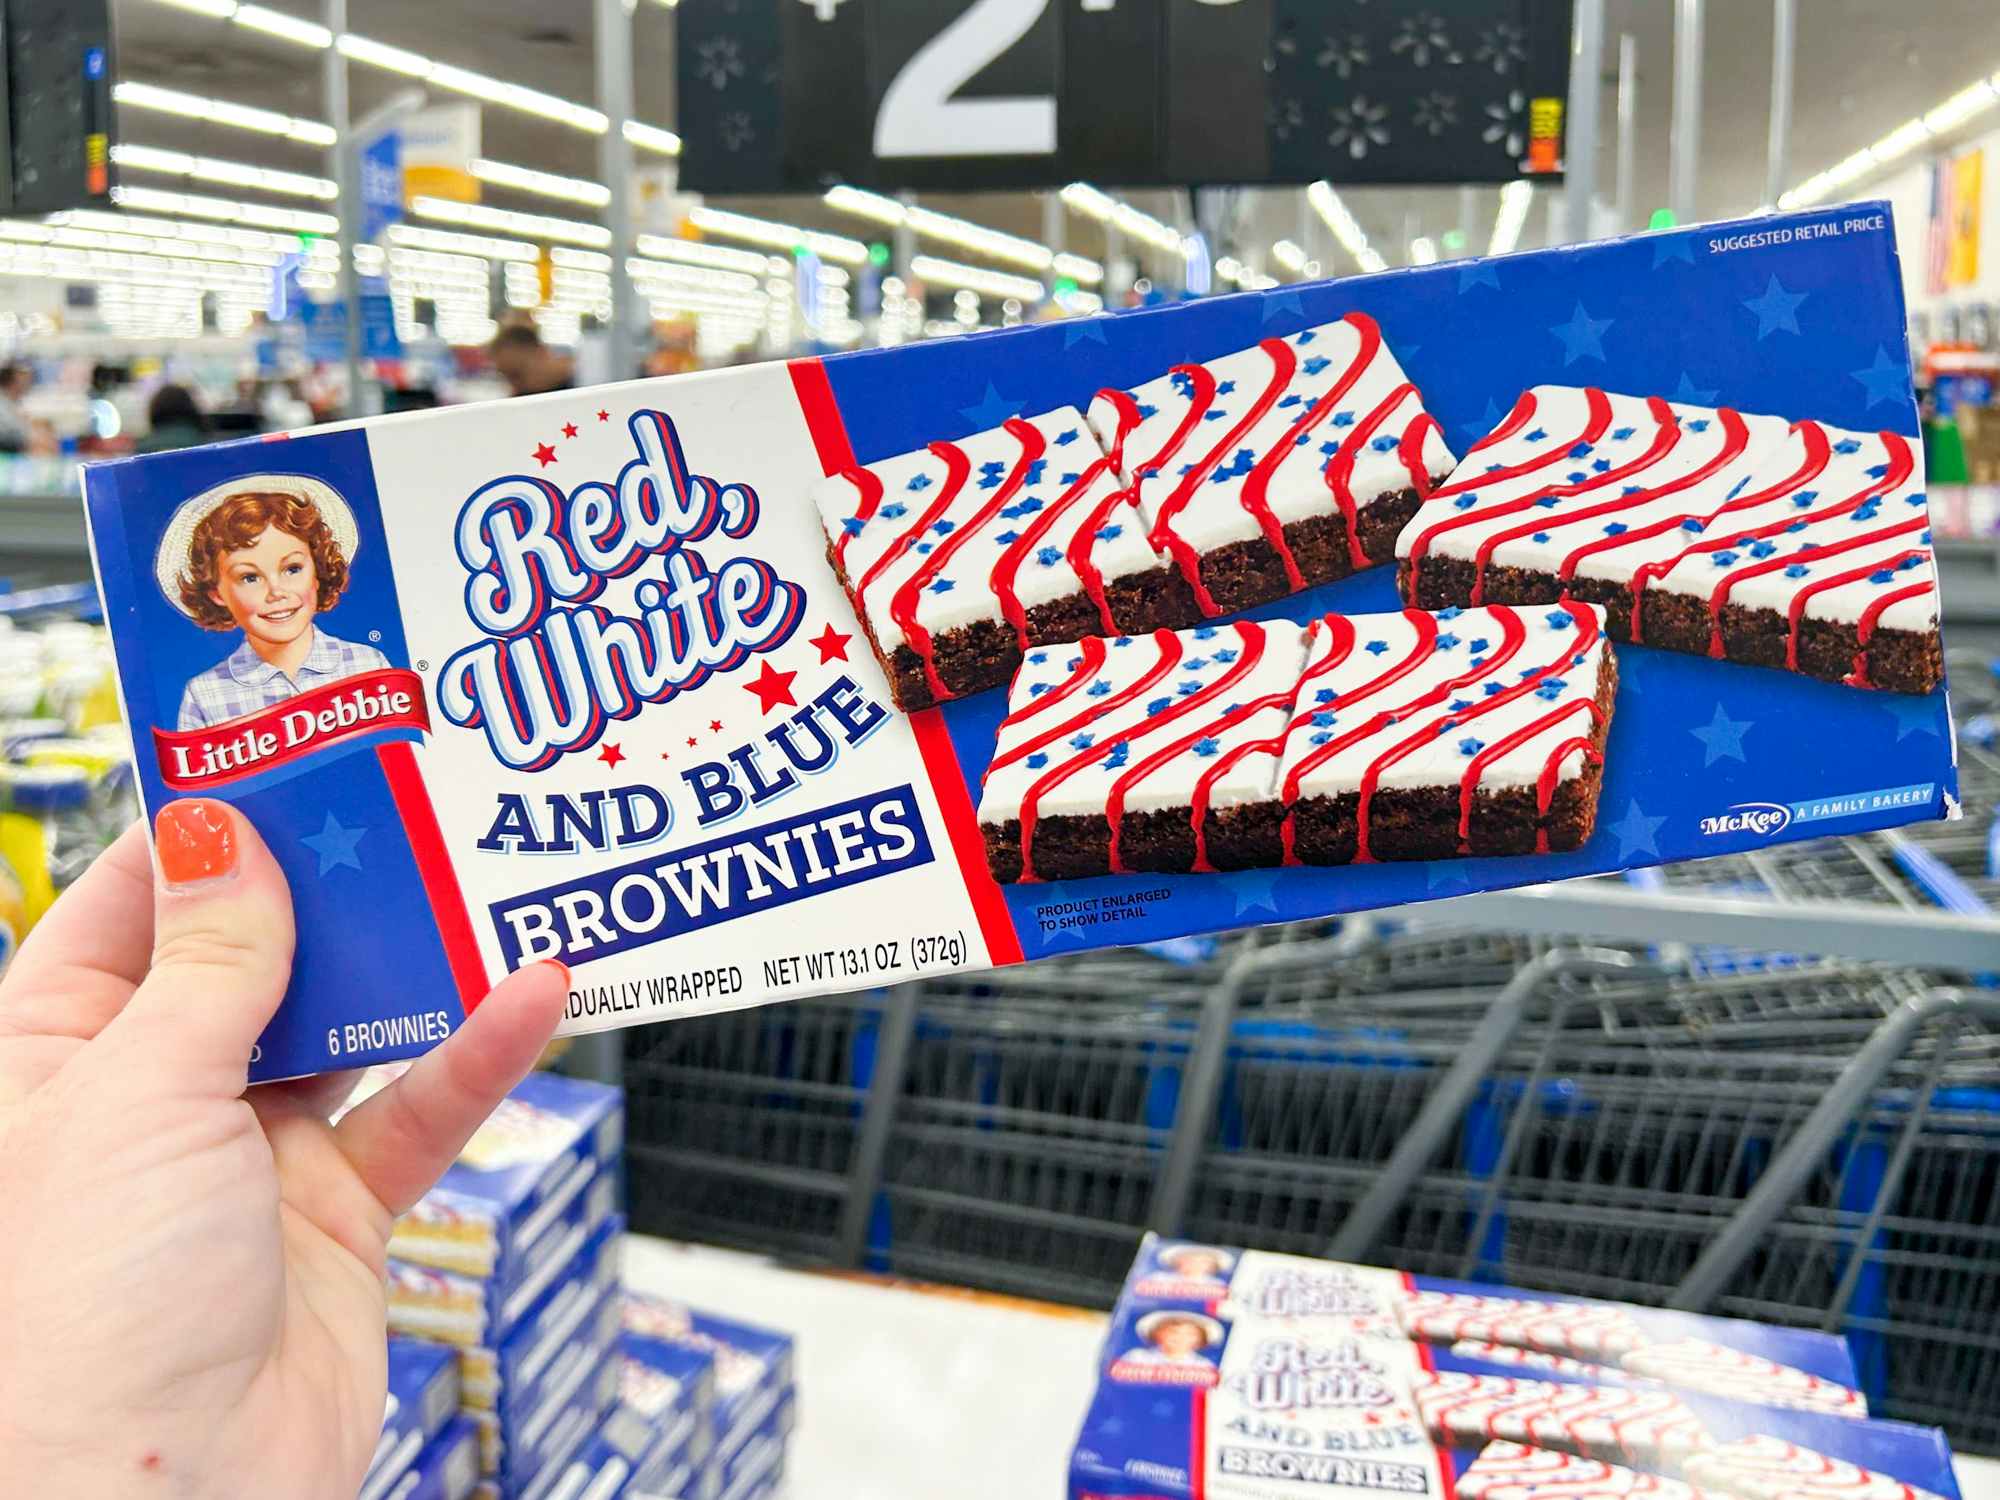 Someone holding up a box of Red White and Blue Little Debbie brownies in Walmart